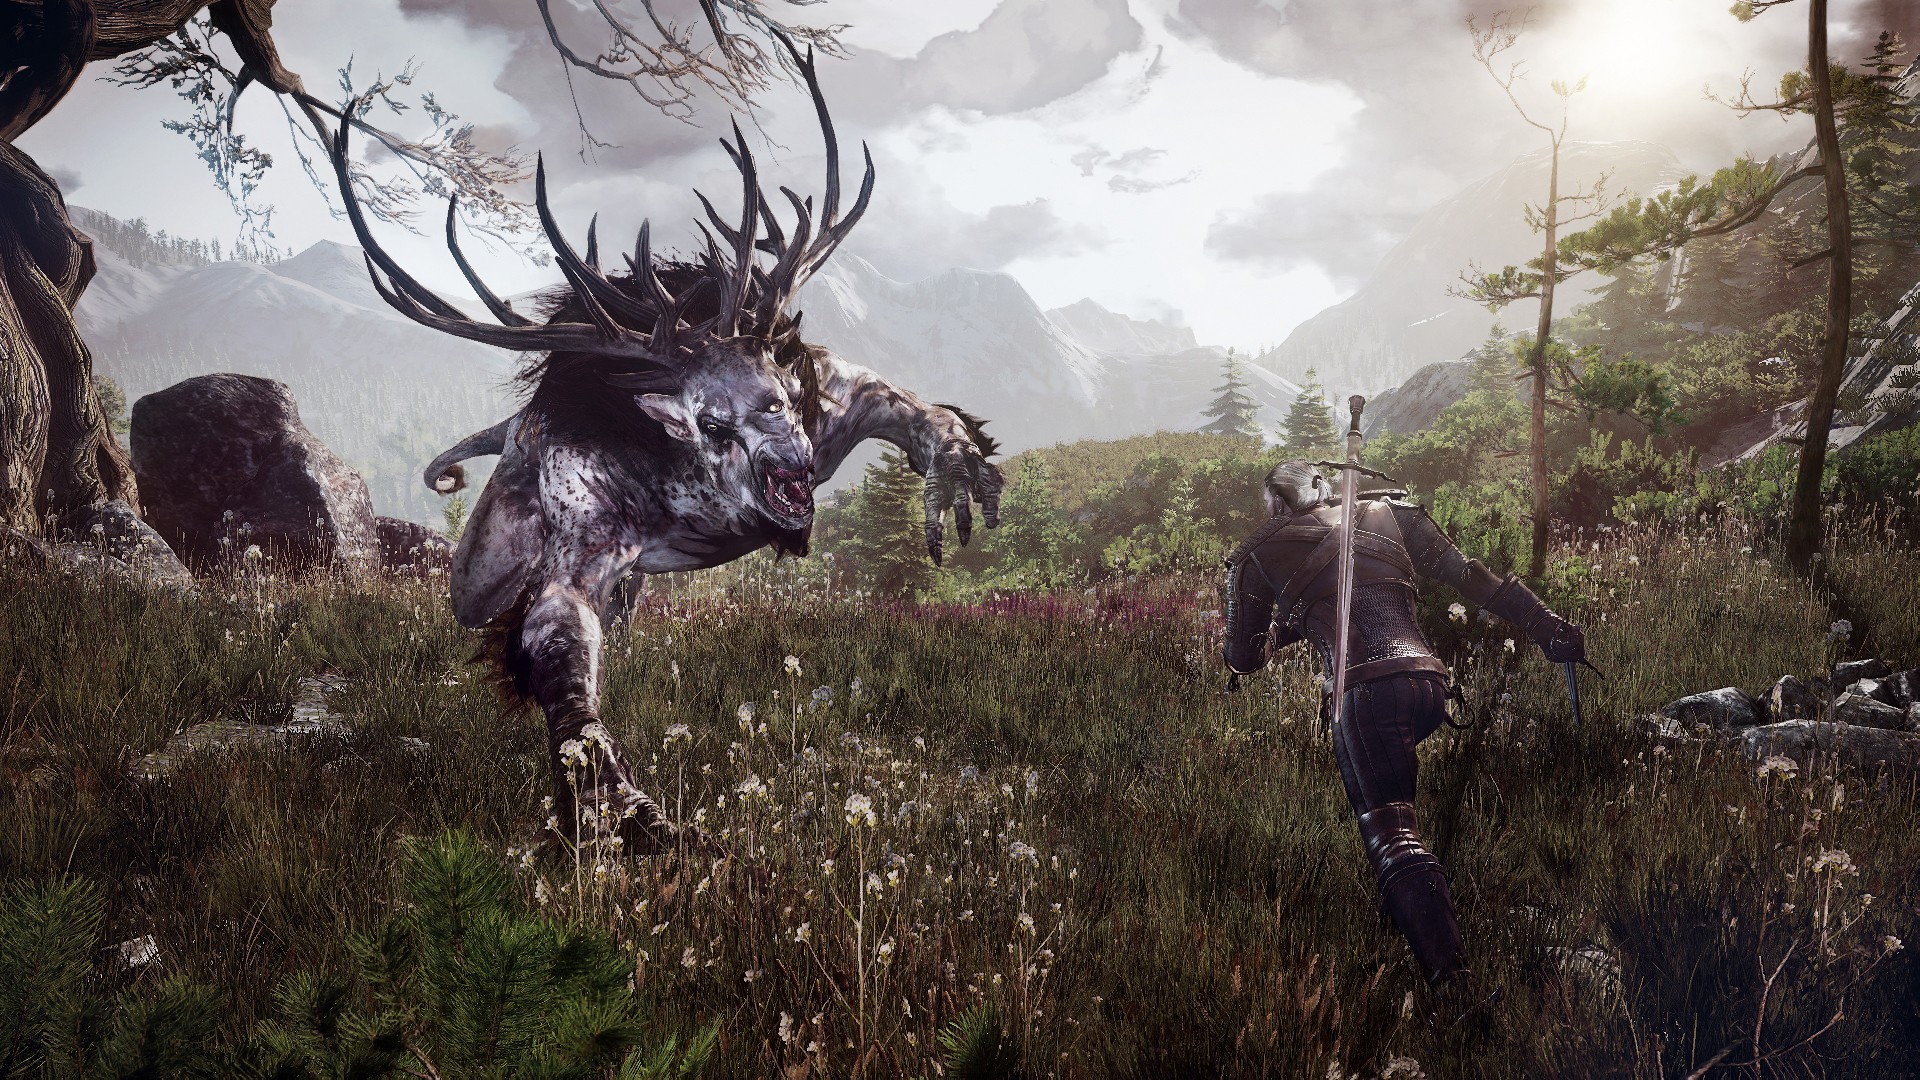 Best open-world games: Geralt of Rivia is rushing towards a fiendish monster with ghastly skin and stag-like antlers.